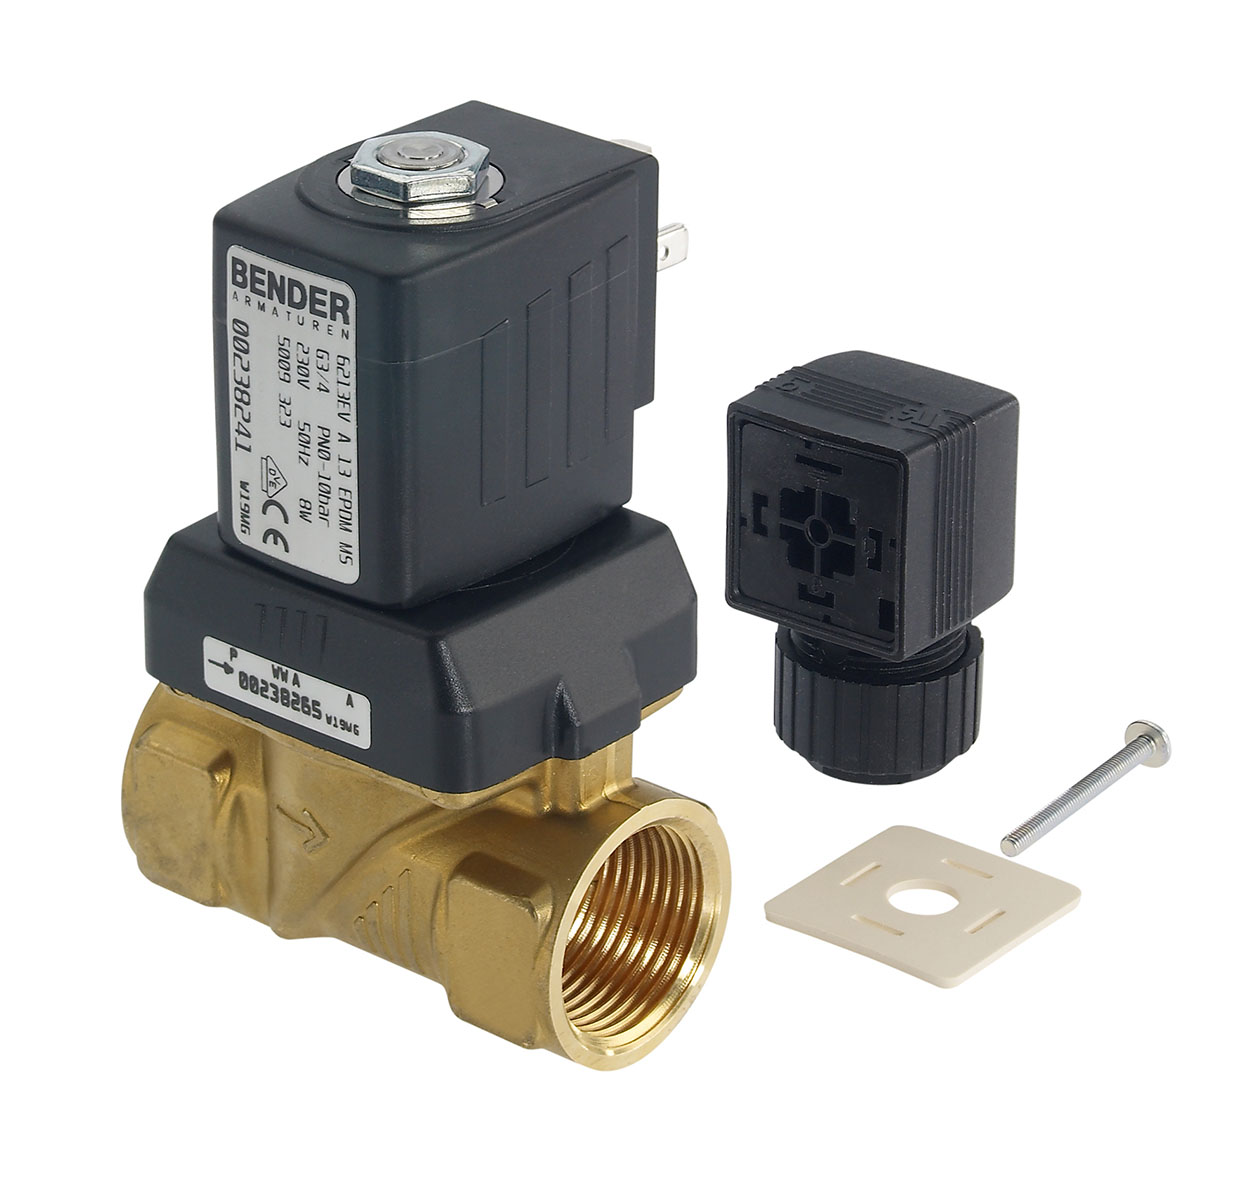 5009302 - 2/2 way solenoidvalve normally closed for fluids Type 1; female thread